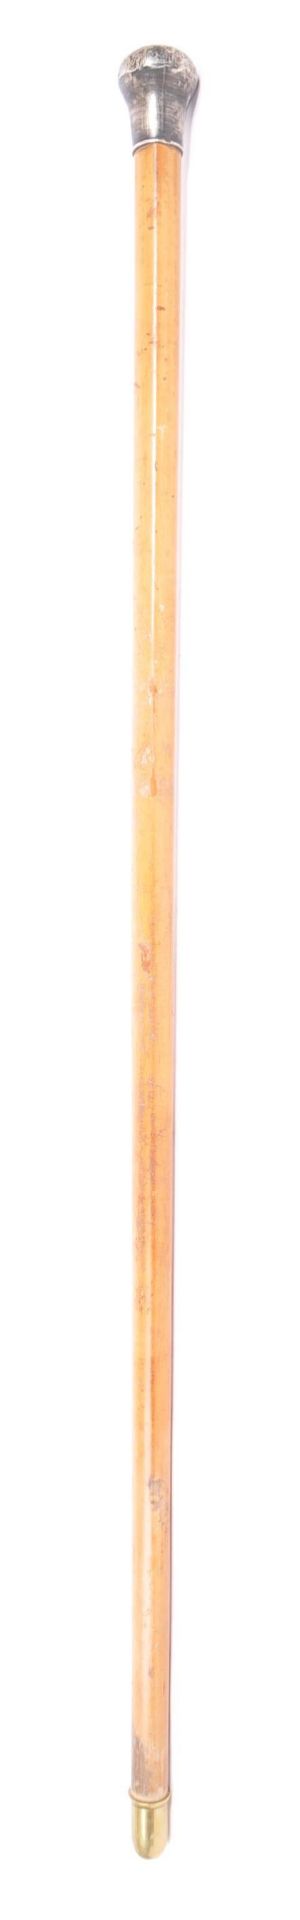 HALLMARKED SILVER TOPPED MAPLE WALKING CANE